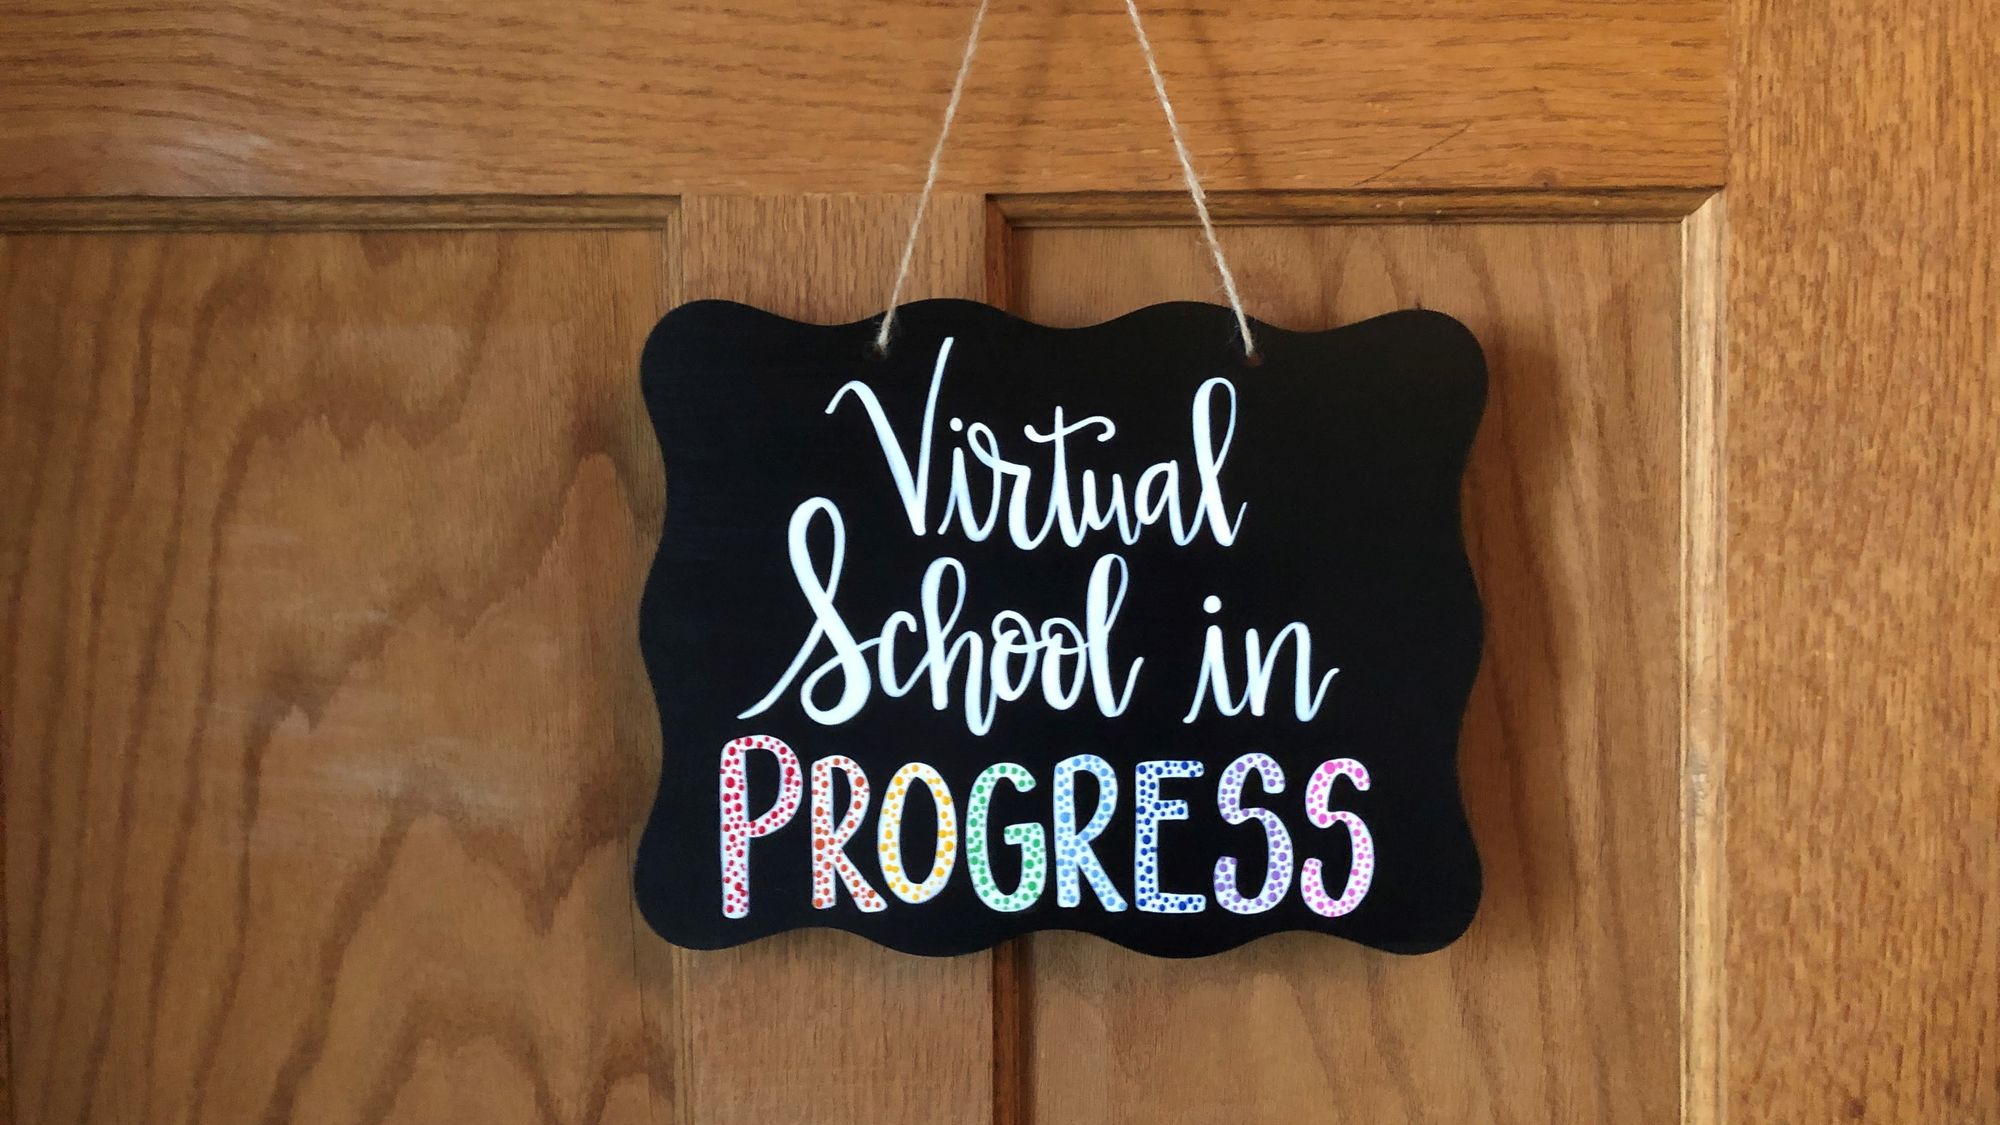 A sign that says "Virtual School in Progress"